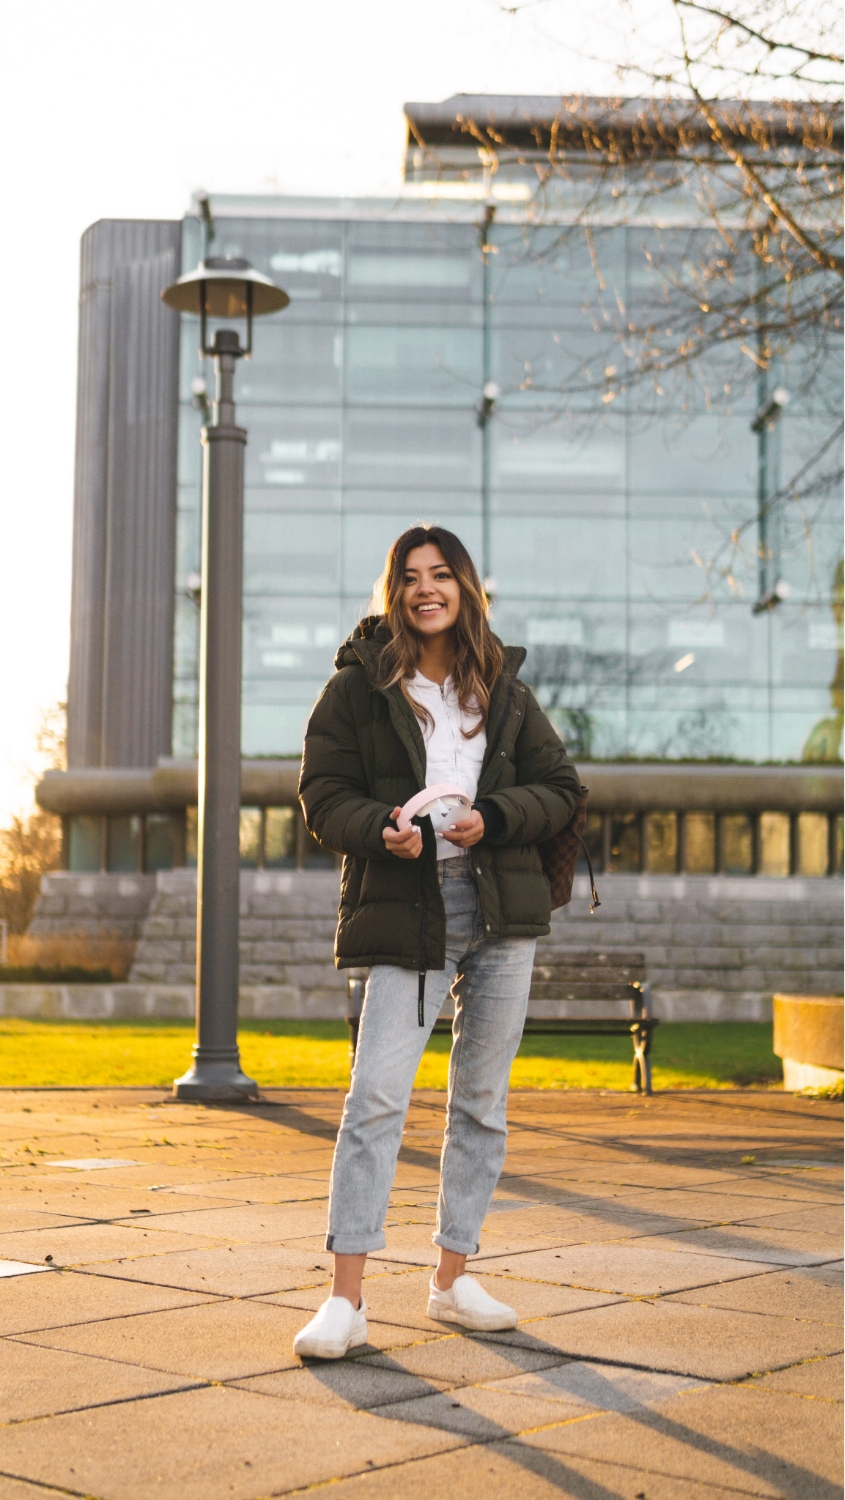 A photo of a student posing on their university campus. They are smiling at the camera and holding pink headphones.